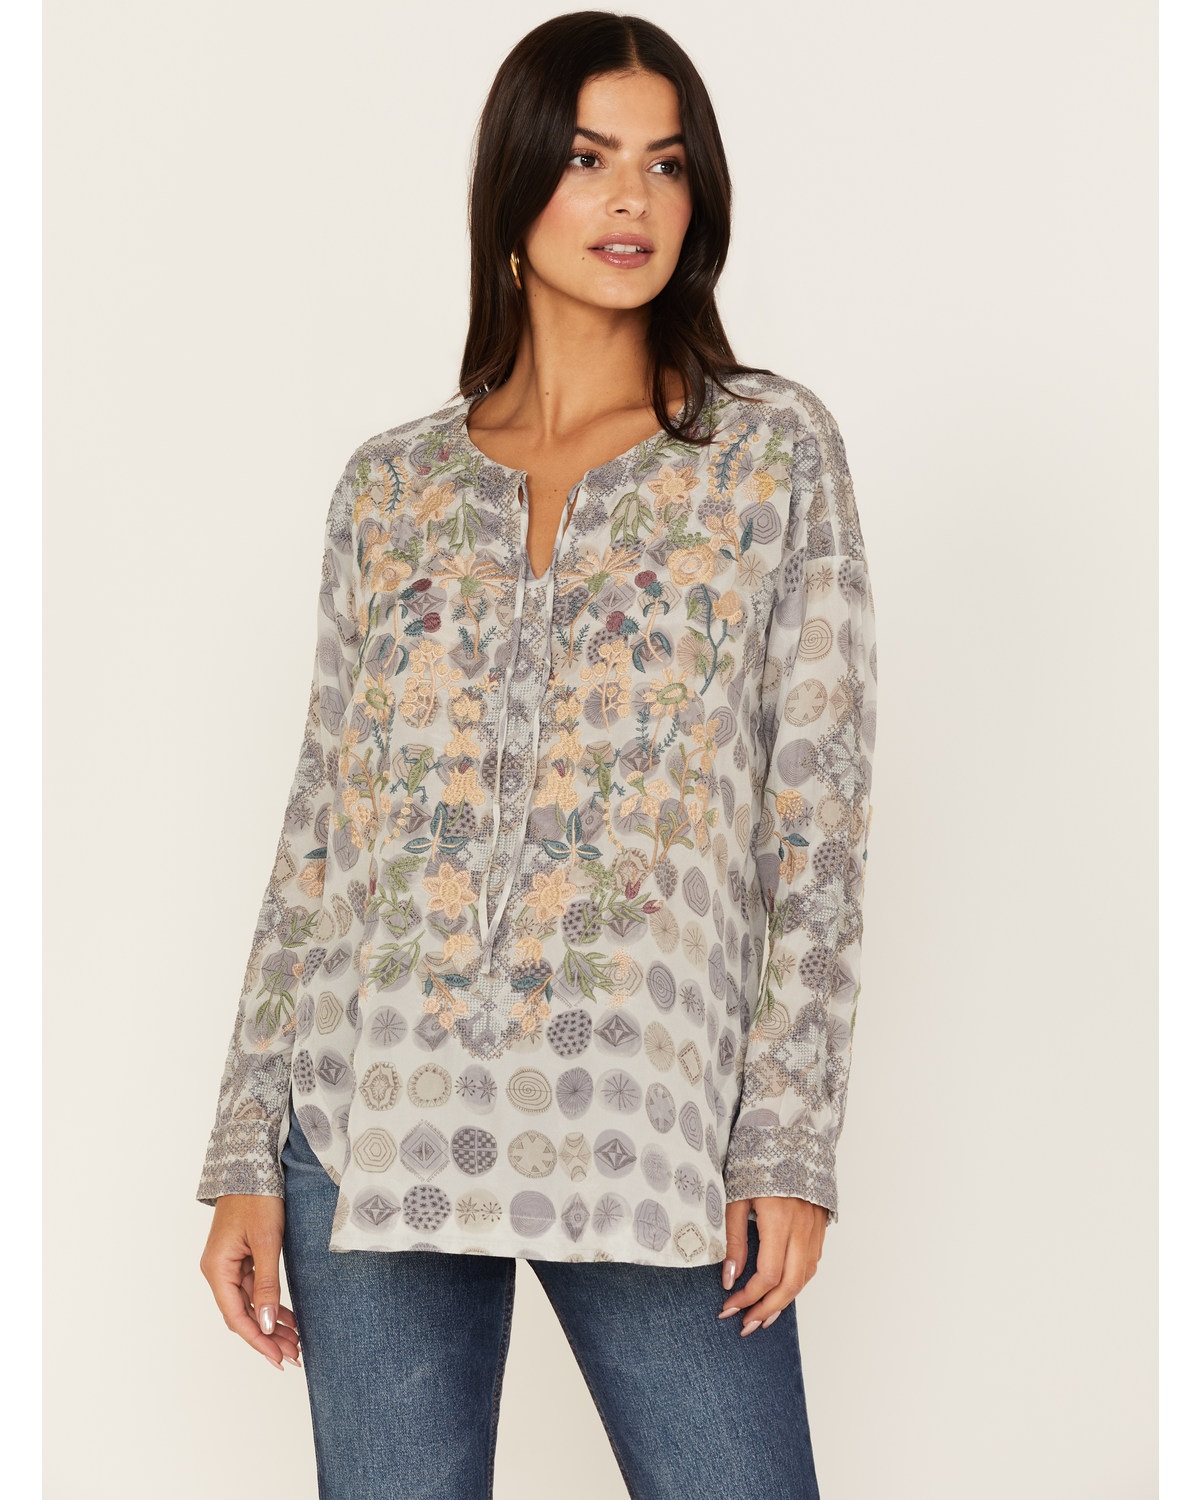 Johnny Was Women's Lakeside Darlyn Embroidered Blouse